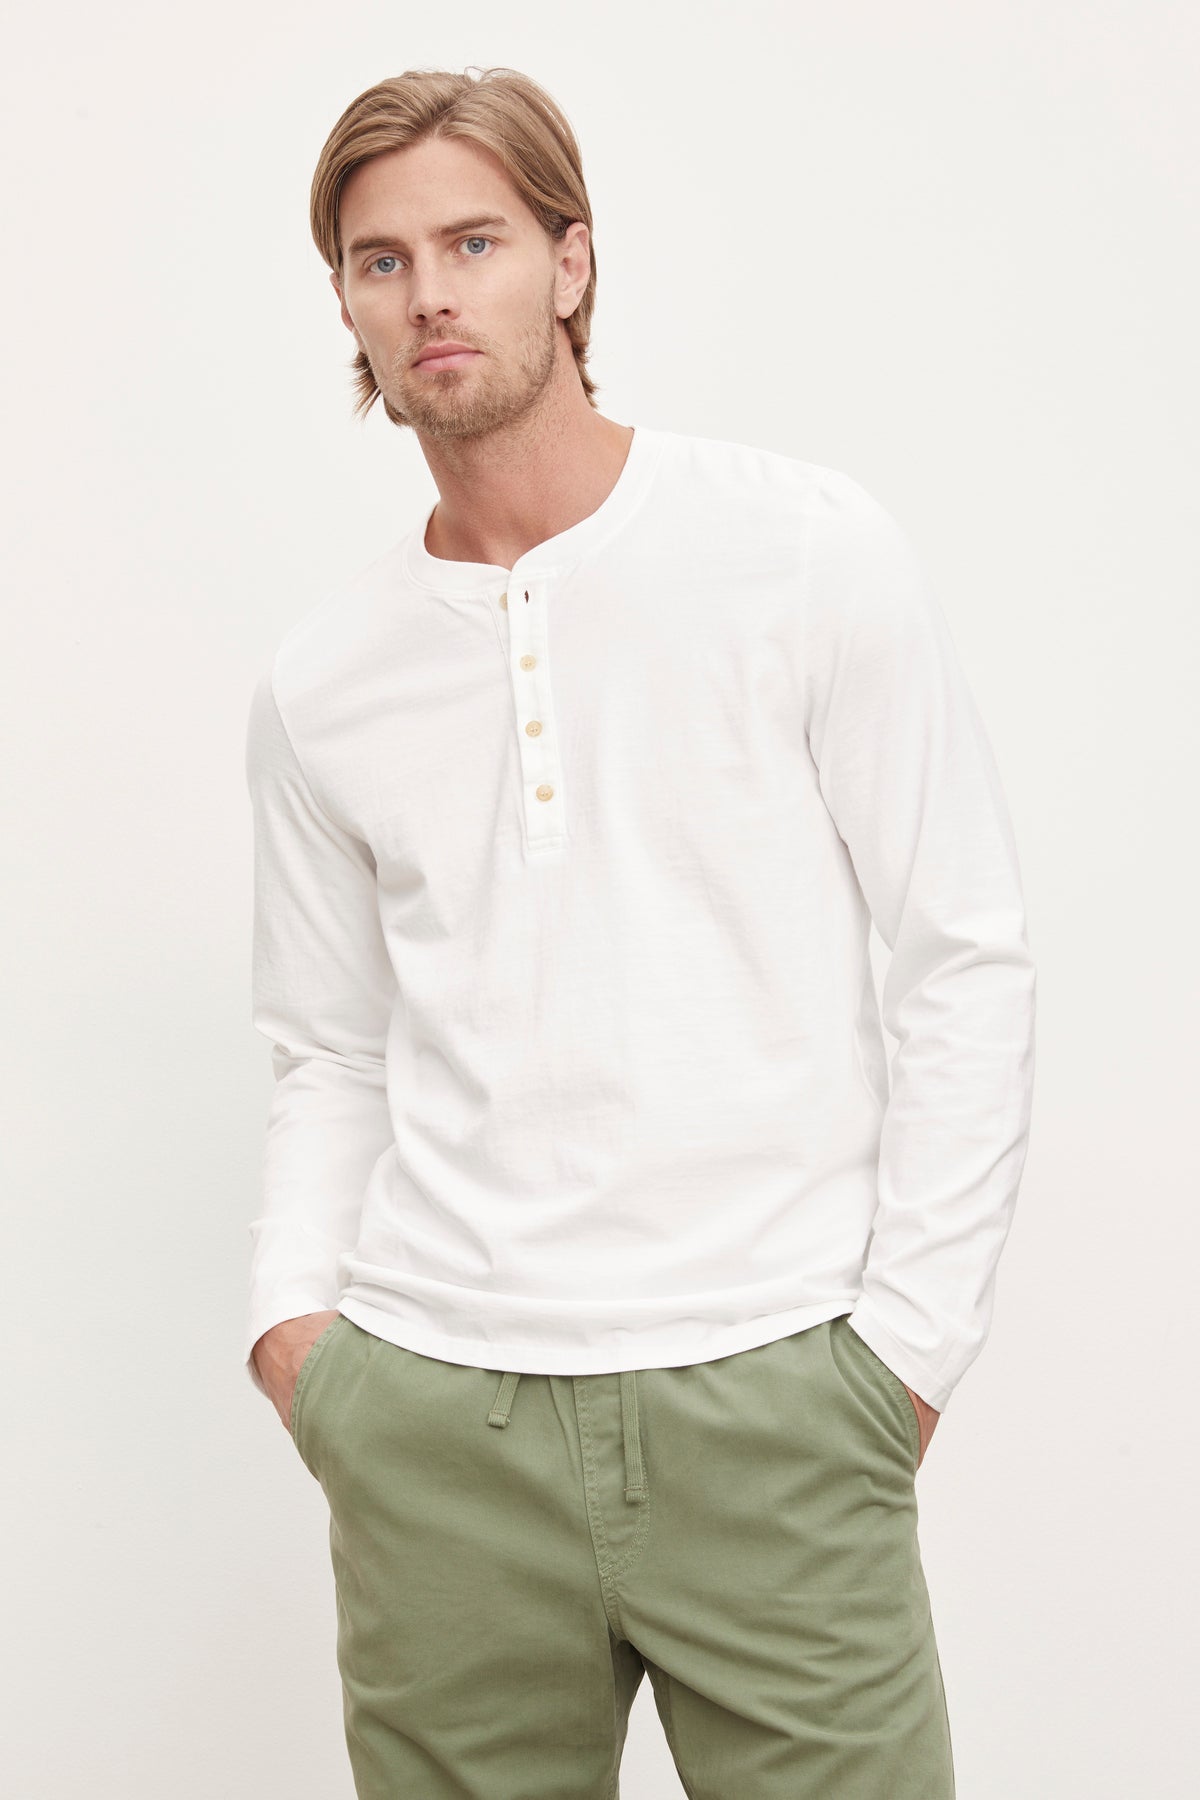 Man with blond hair wearing a white long-sleeve Velvet by Graham & Spencer HOLT HENLEY henley shirt with a four-button placket and green pants, standing against a plain background.-36009940320449